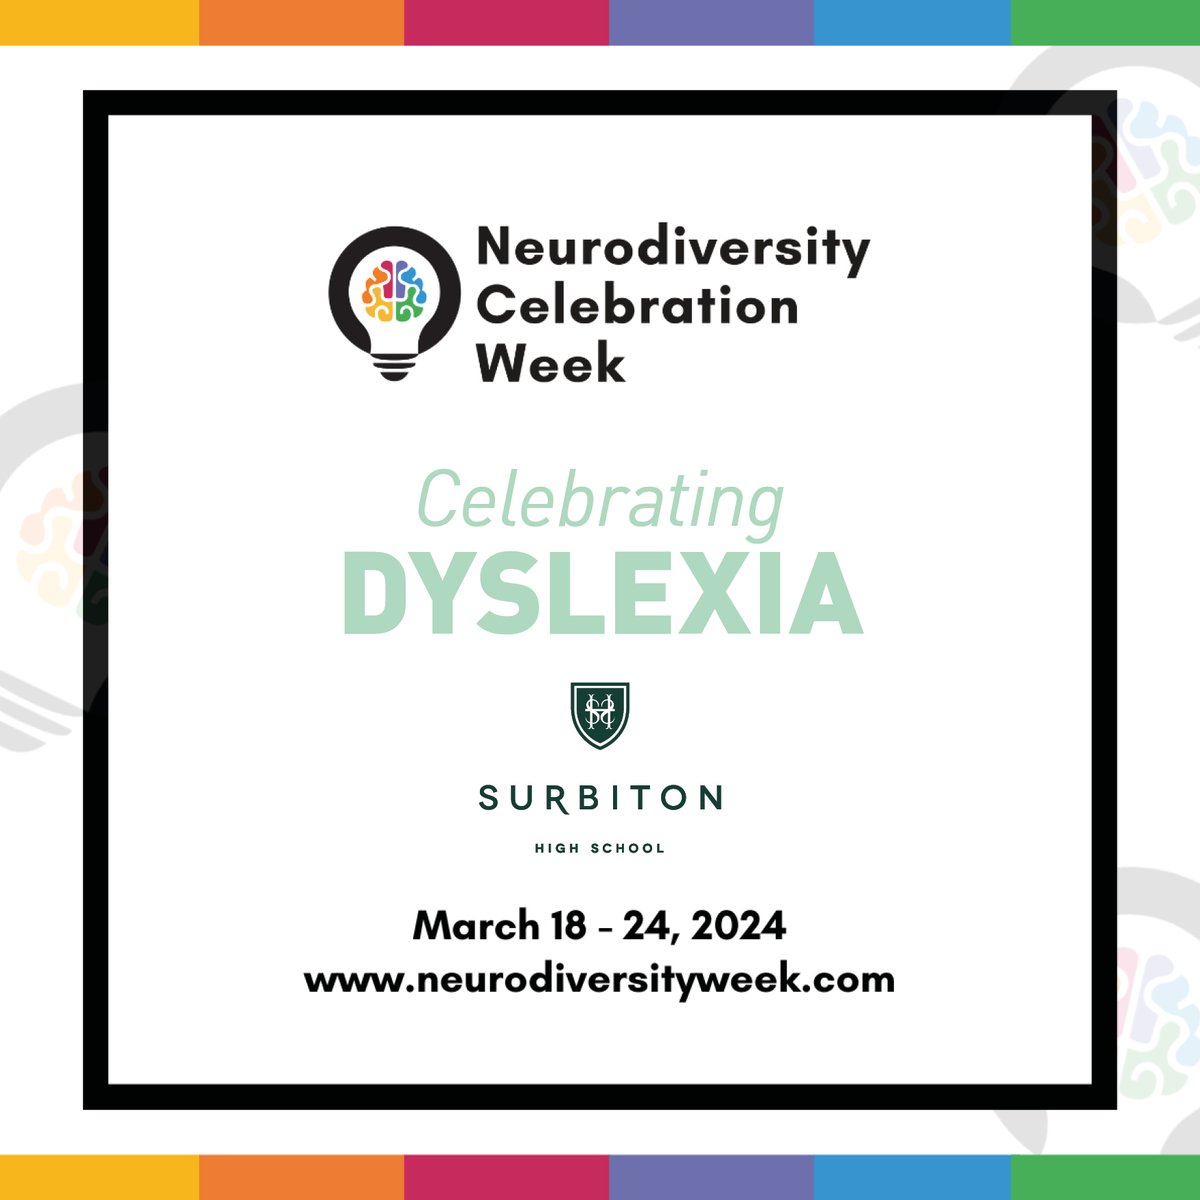 🧠 Around 10% of the population are dyslexic, with many more showing symptoms. Dyslexia can impact reading, writing, and processing info. Despite challenges, dyslexic individuals often excel in creativity, problem-solving, and communication. #NeurodiversityCelebrationWeek